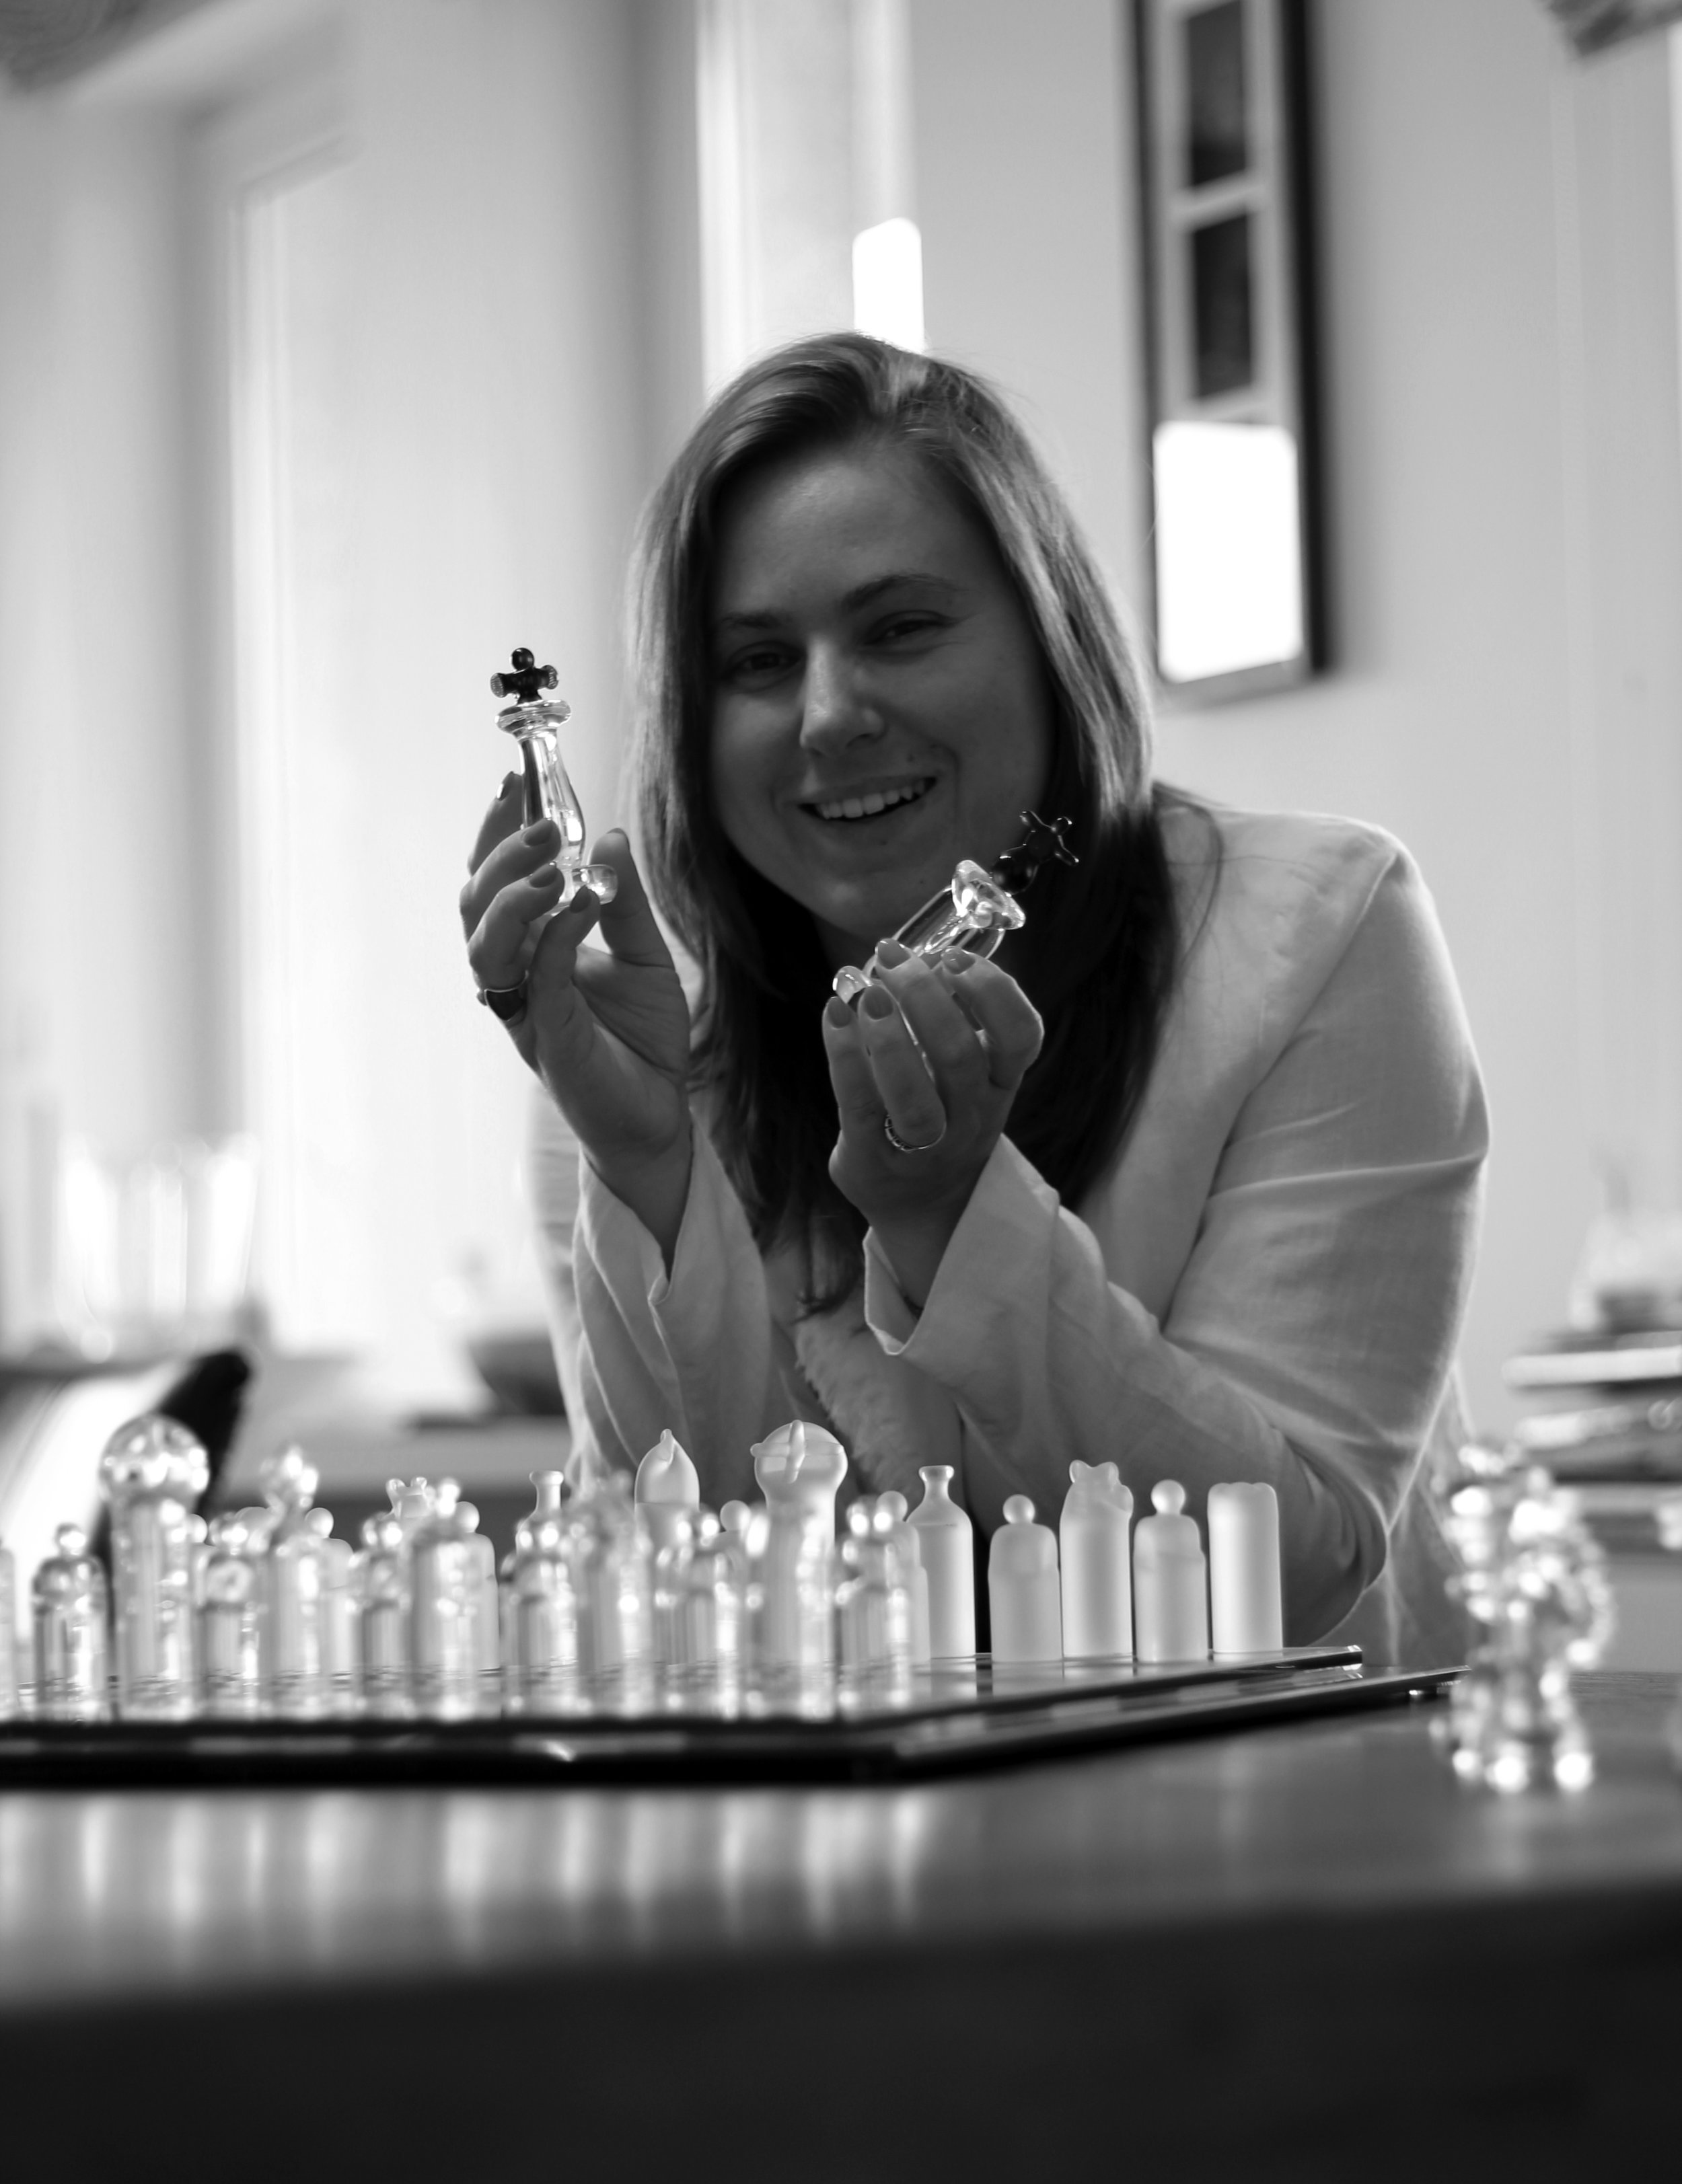 Chess: Judit Polgar still an icon nearly a decade after retirement